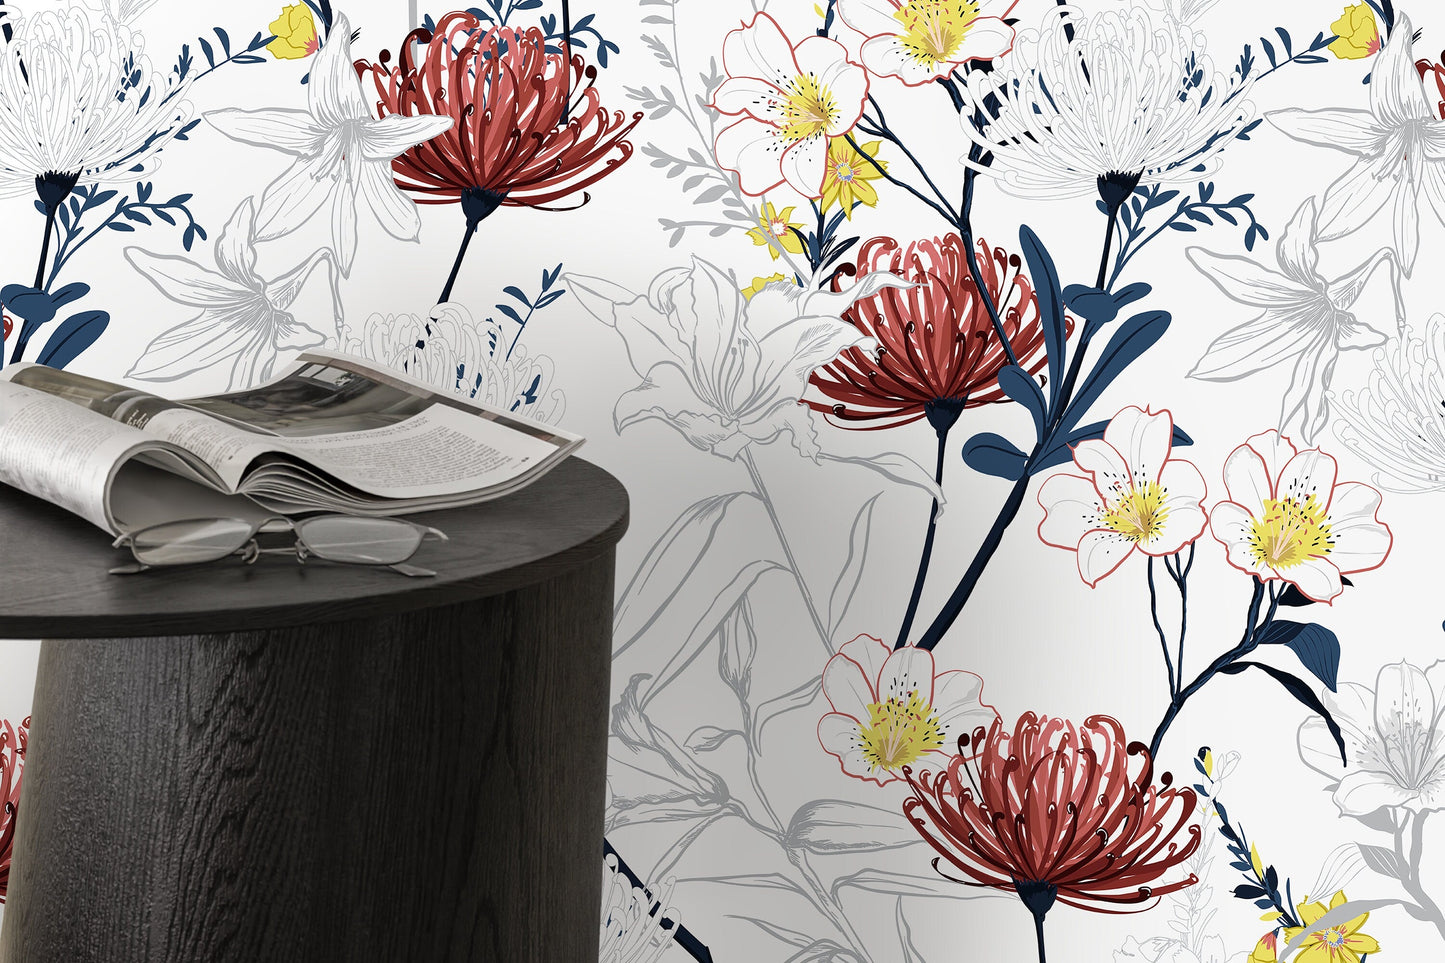 Outline Flowers Wallpaper - Removable Wallpaper Peel and Stick Wallpaper Wall Paper Wall - B432